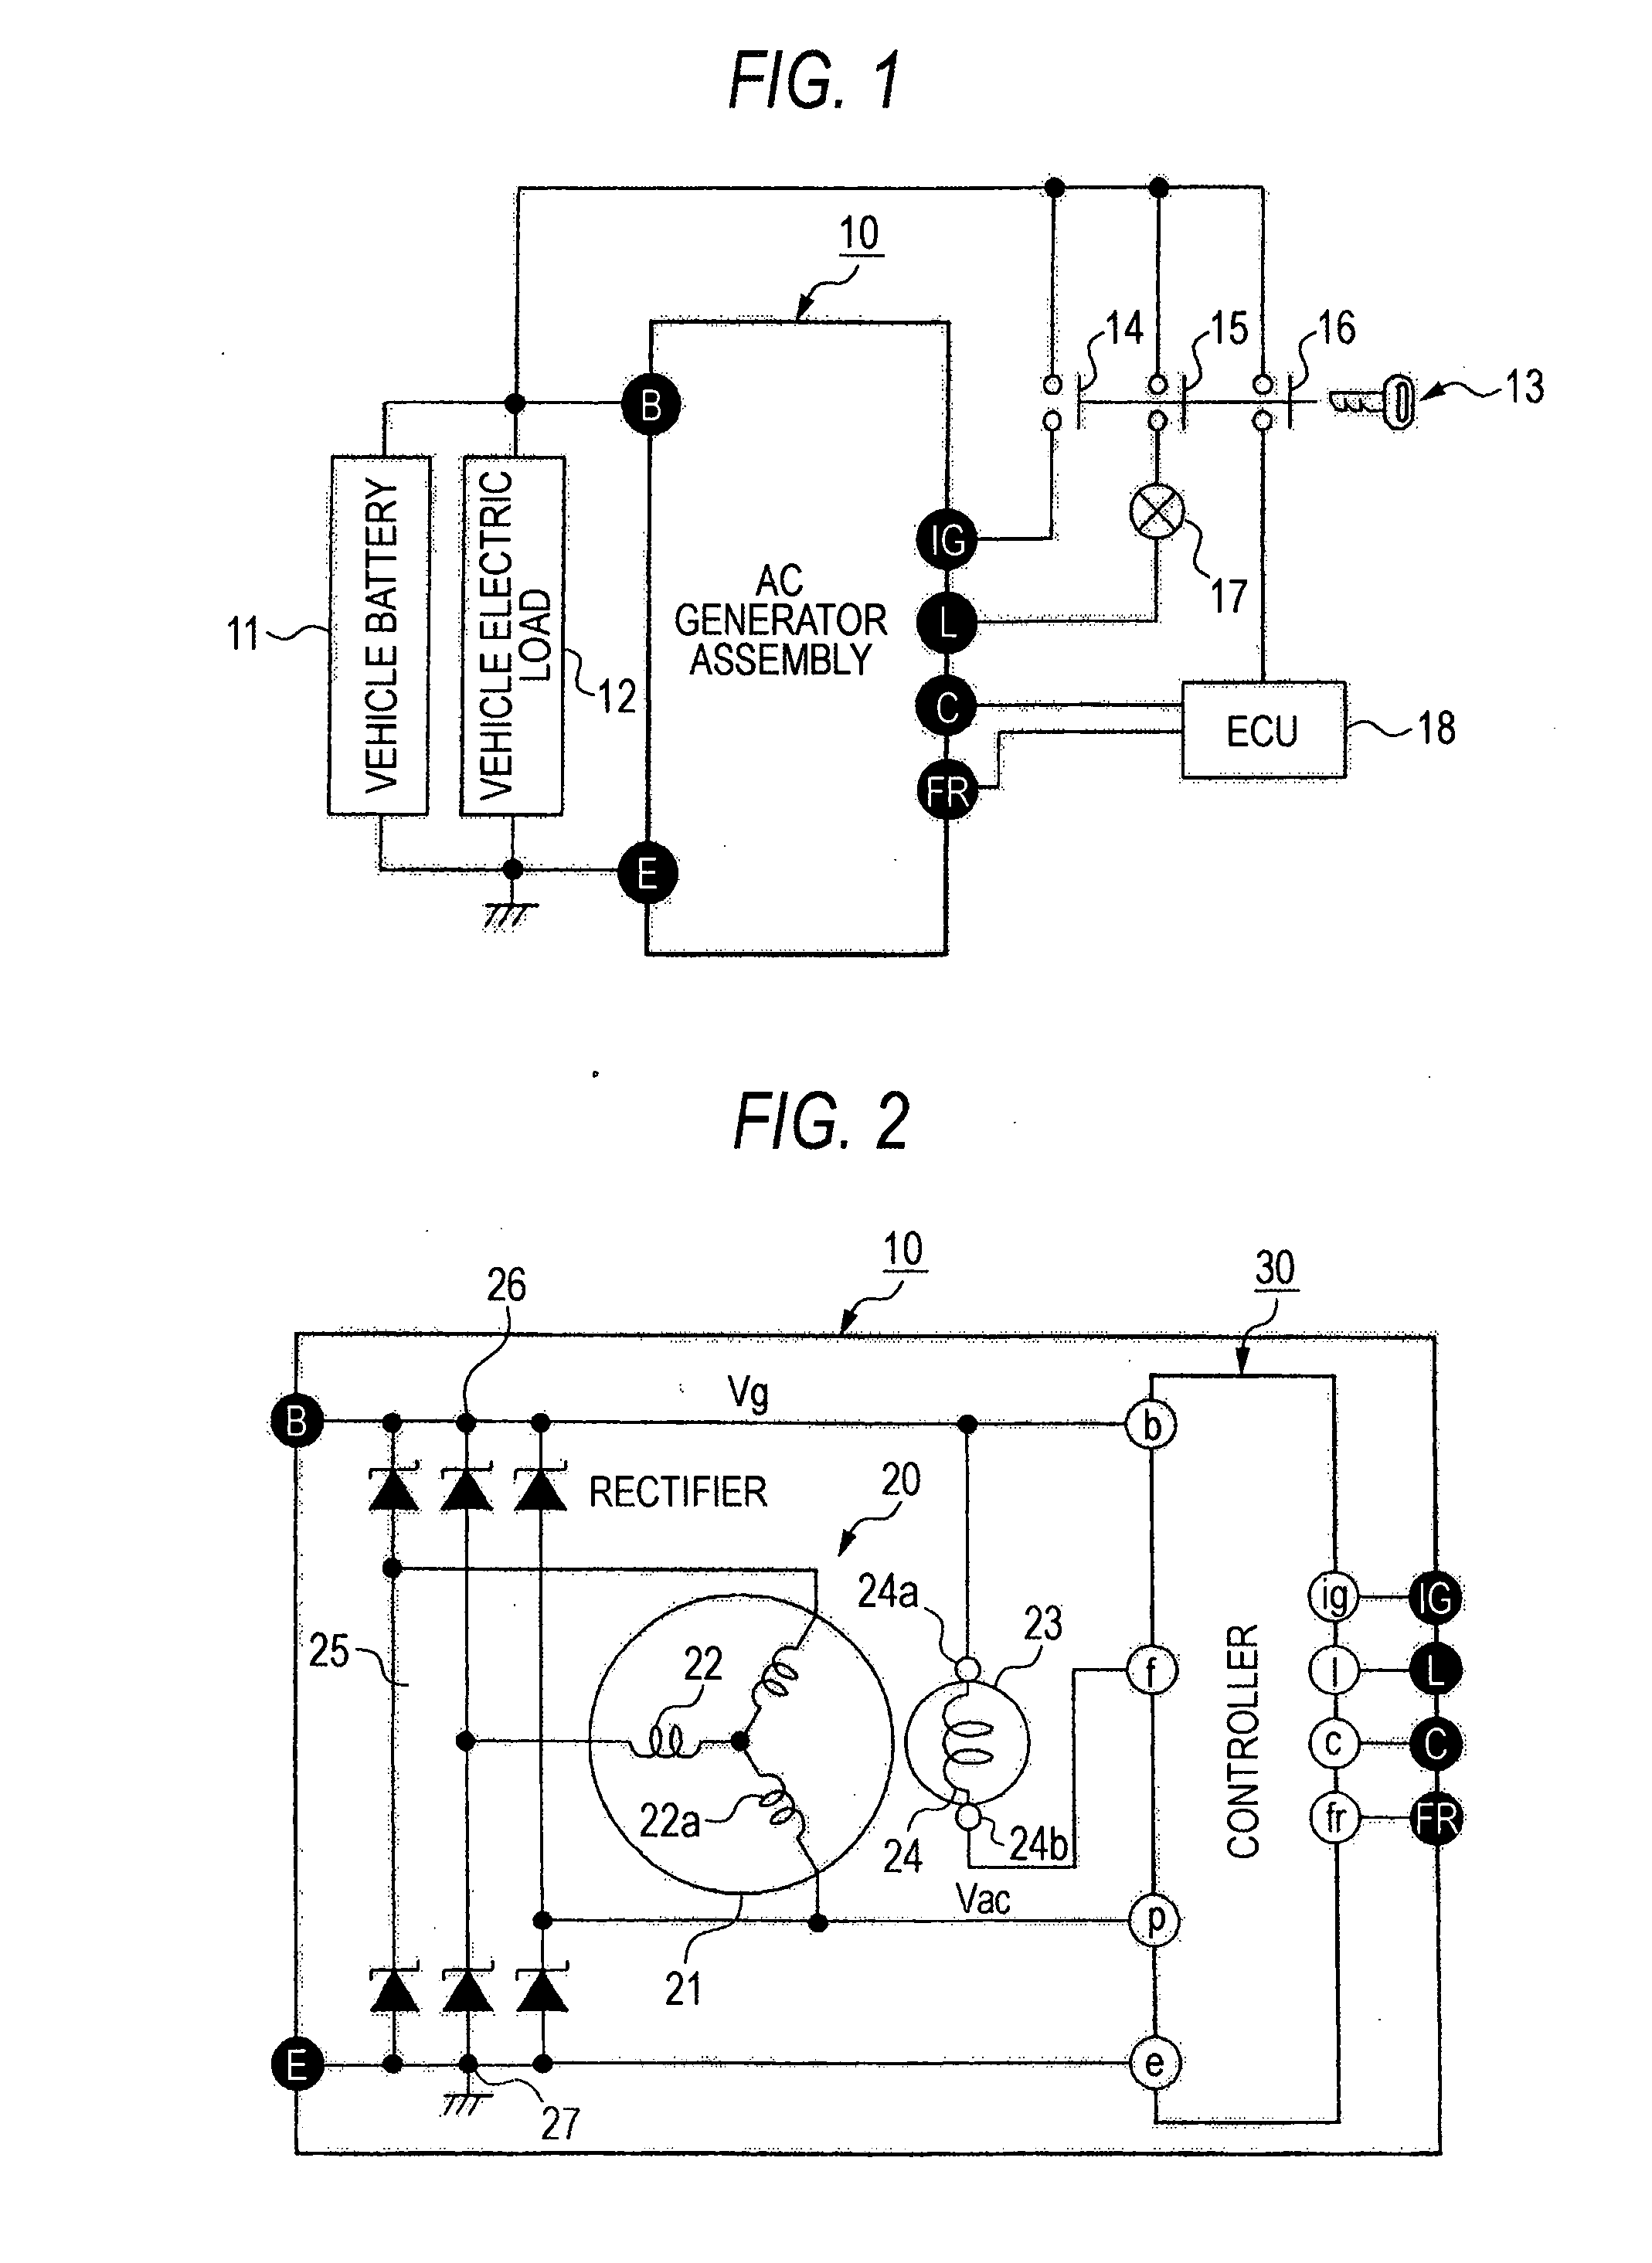 Controller for vehicle AC generator